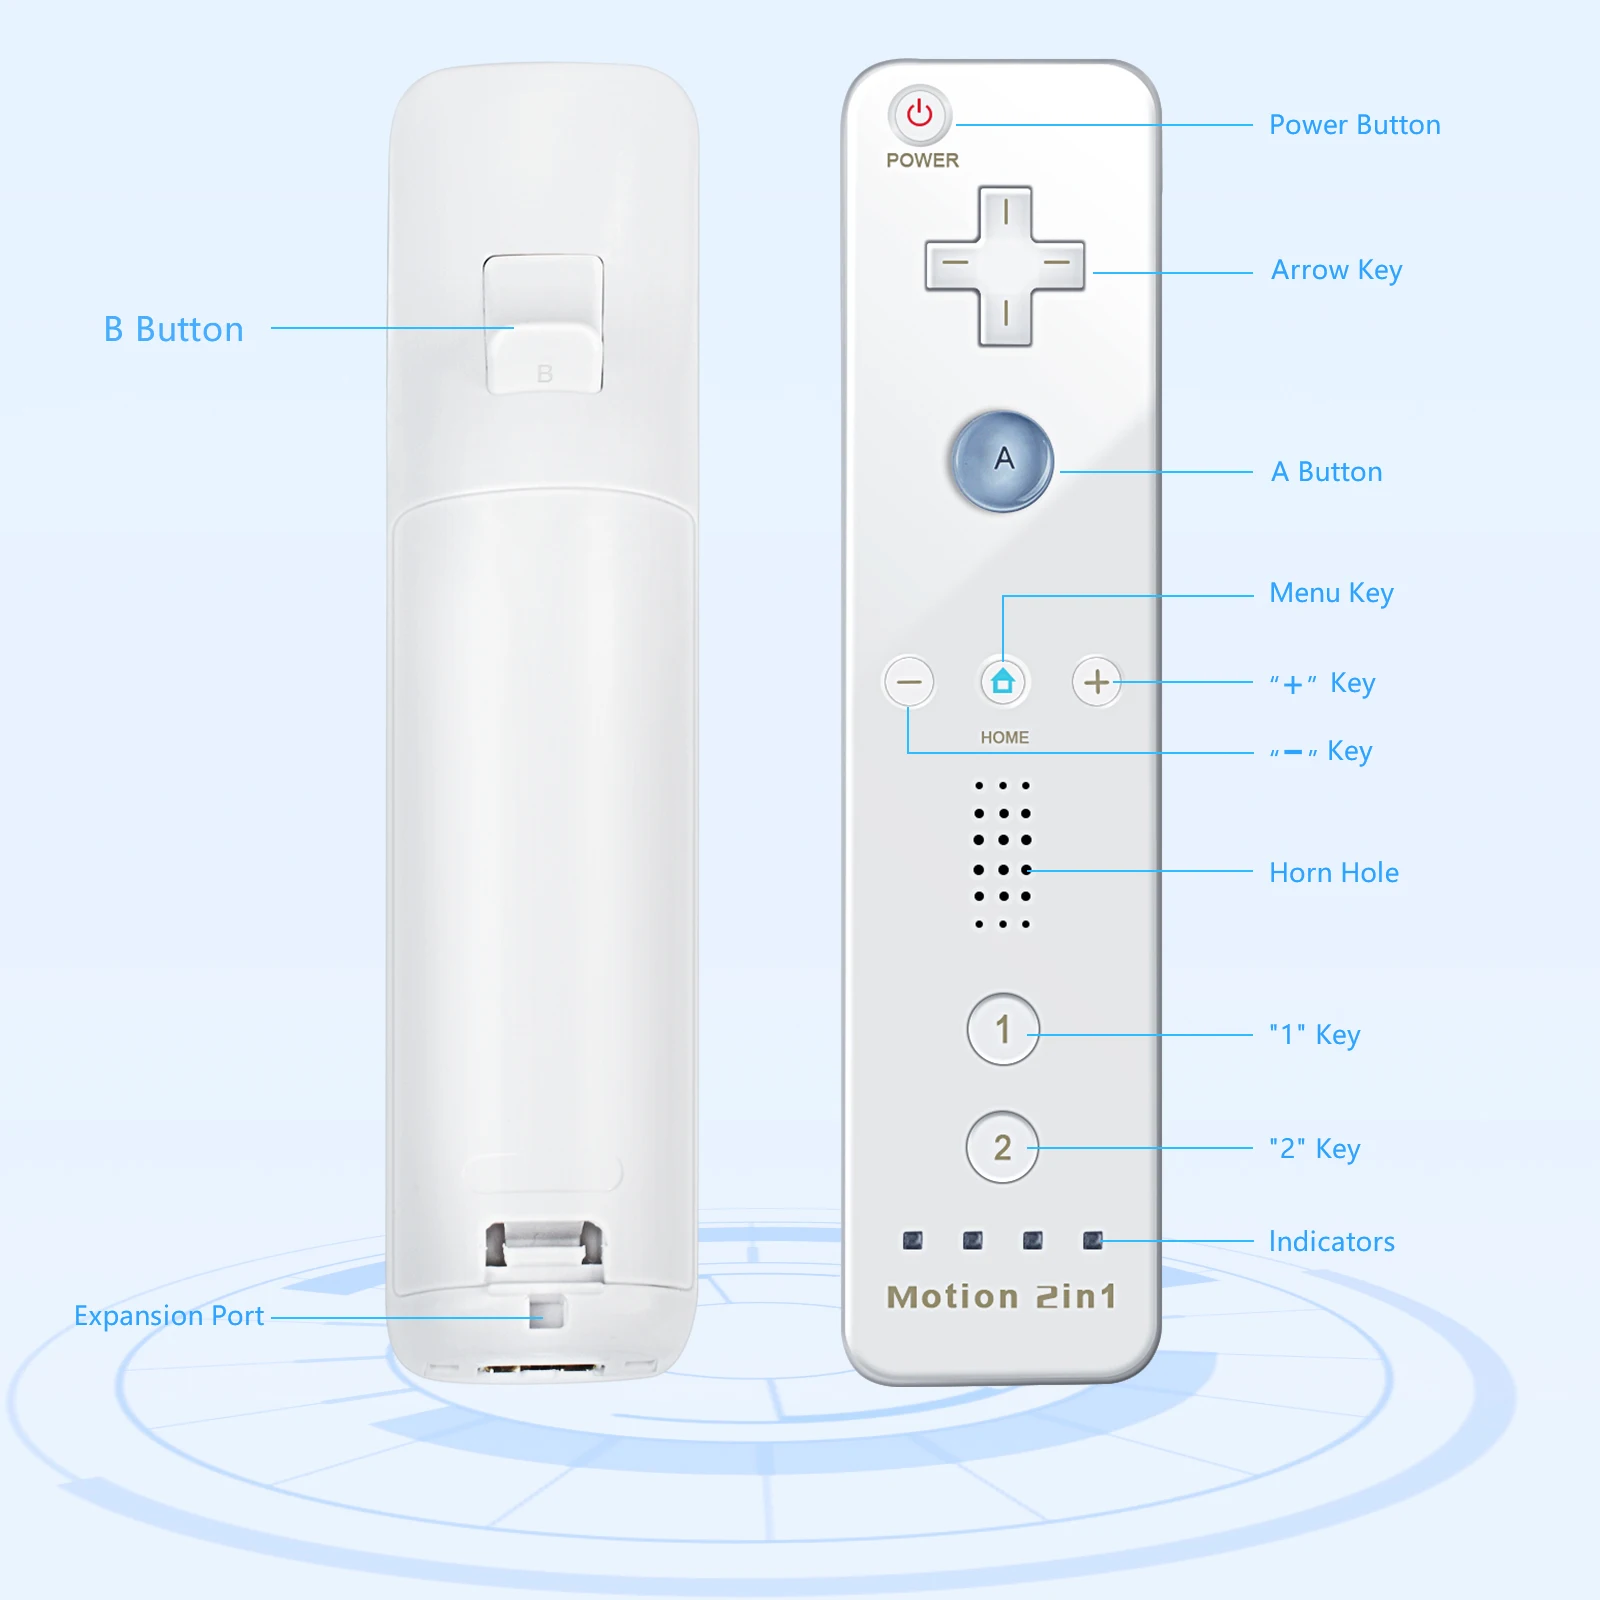 Built-in Motion Plus Remote For Nintendo Wii Controller Wii Remote Nunchuck Wii Motion Plus Controller Wireless Gamepad Controle